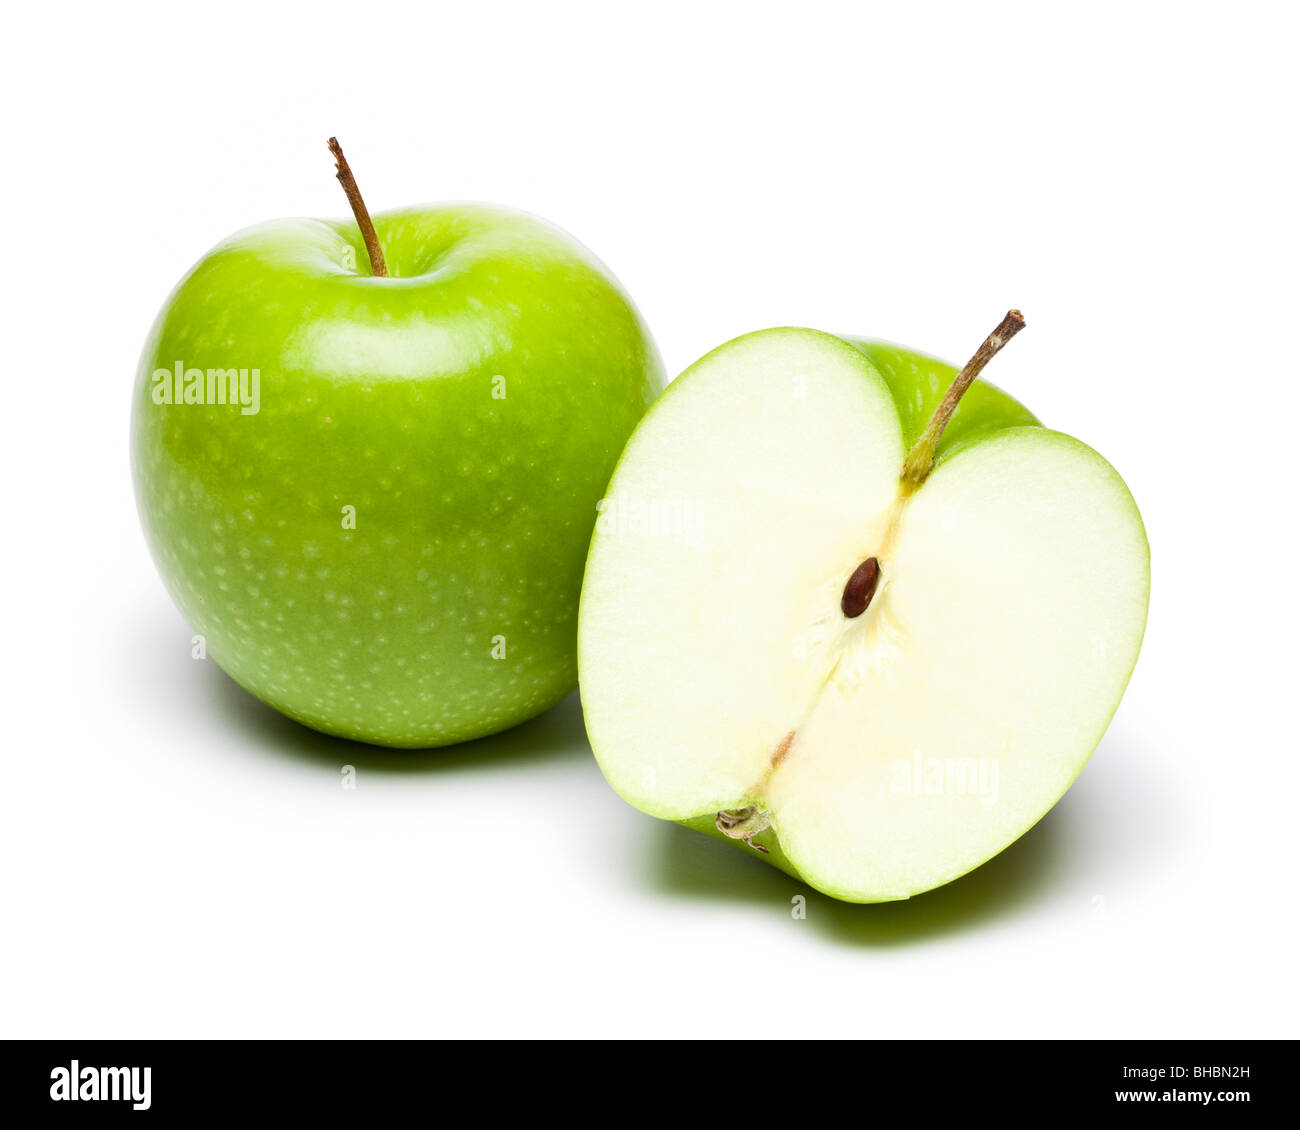 Green apples whole and halved Stock Photo